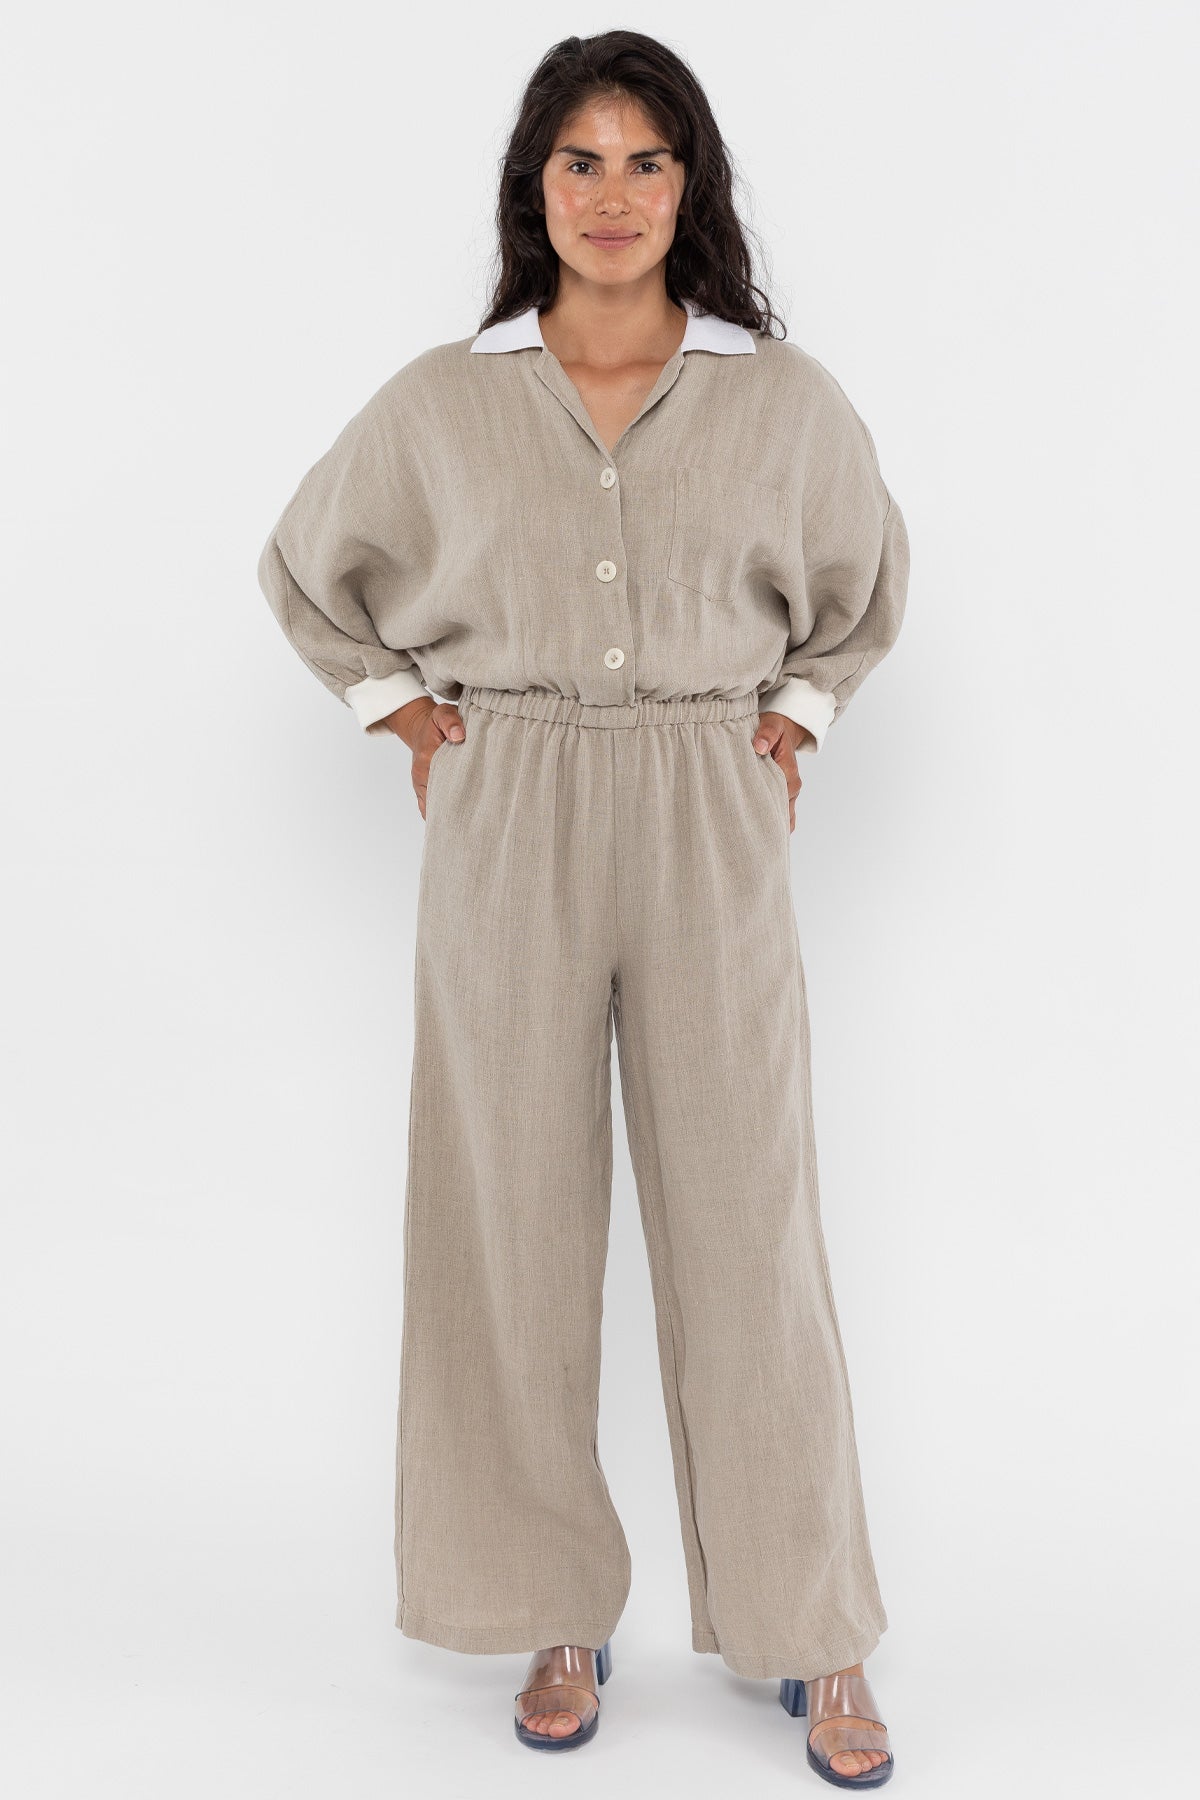 Together Zipper Jumpsuit | Made Trade | Zipper jumpsuit, Sustainable womens  clothing, Jumpsuit